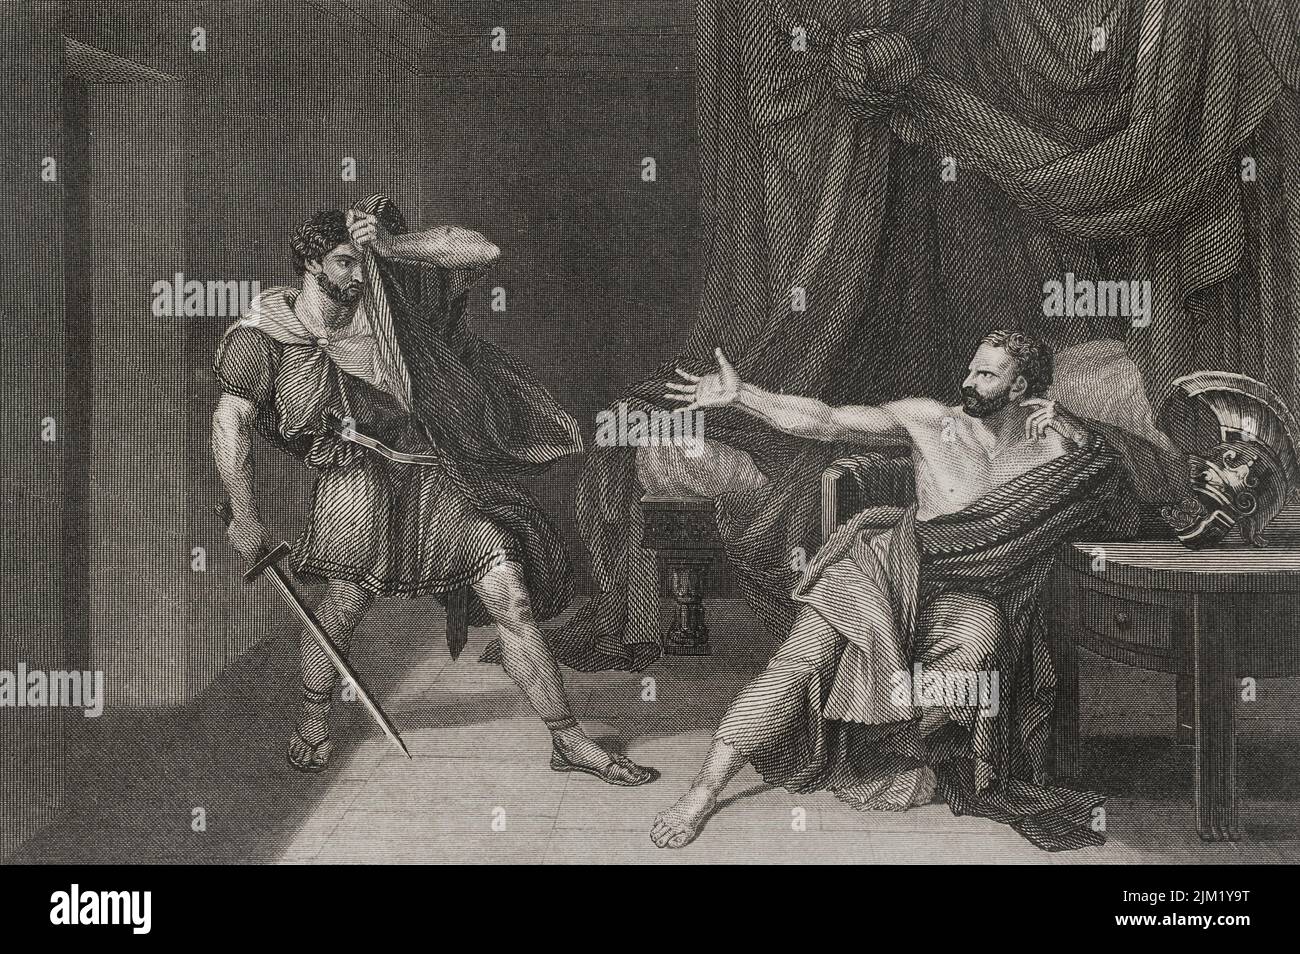 Gaius Marius (ca. 157 BC - 86 BC). Roman general and consul. Marius prisoner at Minturnae. It depicts the attempted execution of the consul Gaius Marius when he was captured in Minturnae. Engraving after a painting by Jean-Germain Drouais. 'Historia Universal', by César Cantú. Volume II, 1854. Stock Photo